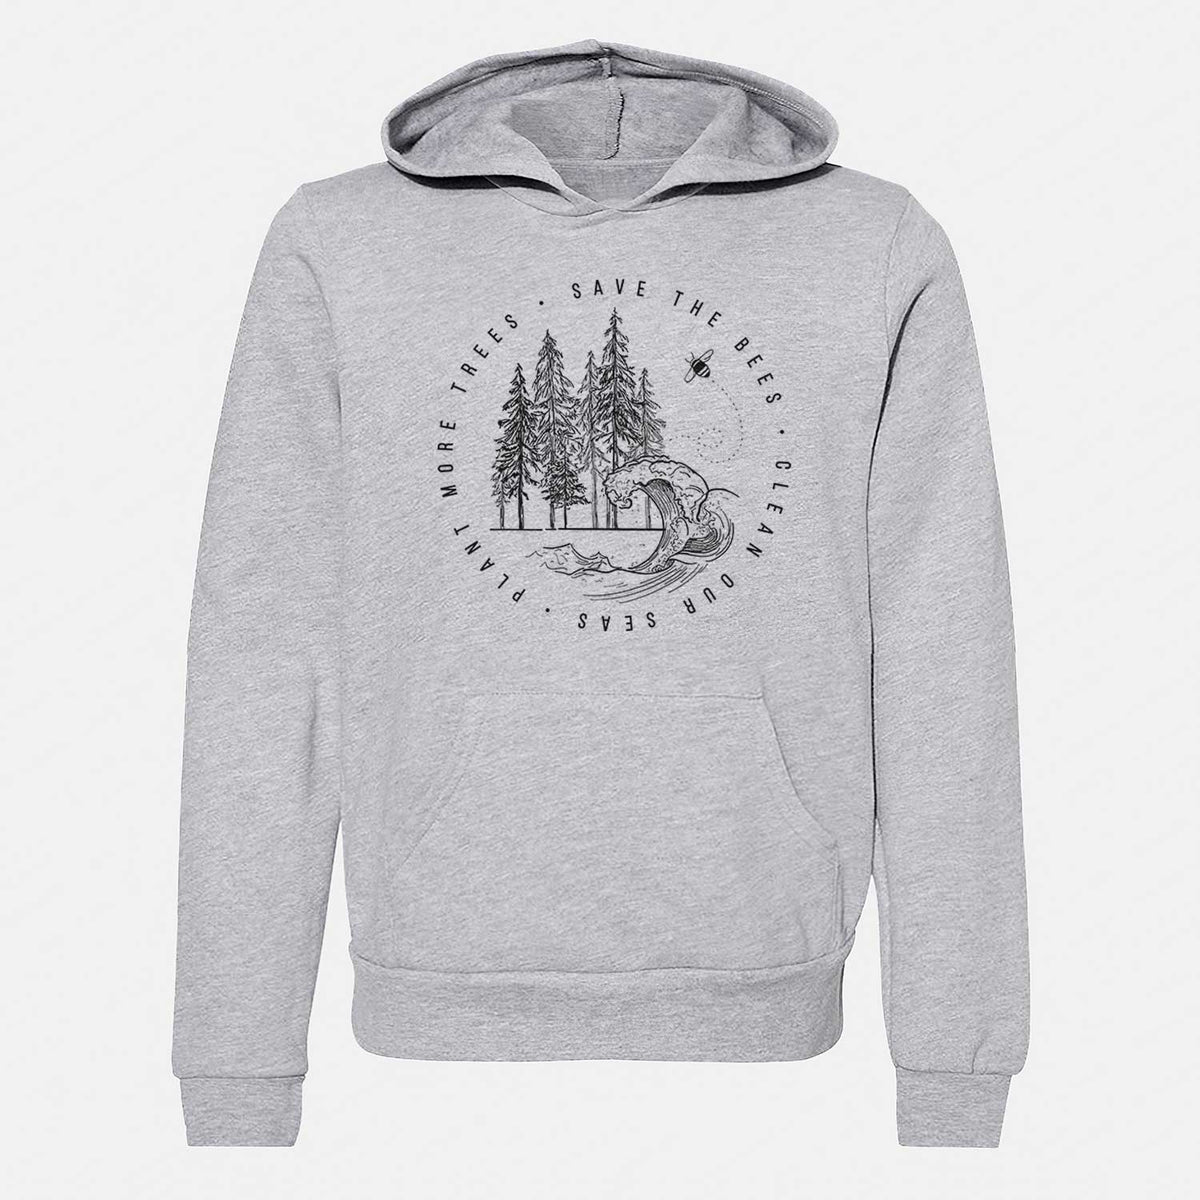 Save the Bees, Clean our Seas, Plant more Trees - Youth Hoodie Sweatshirt